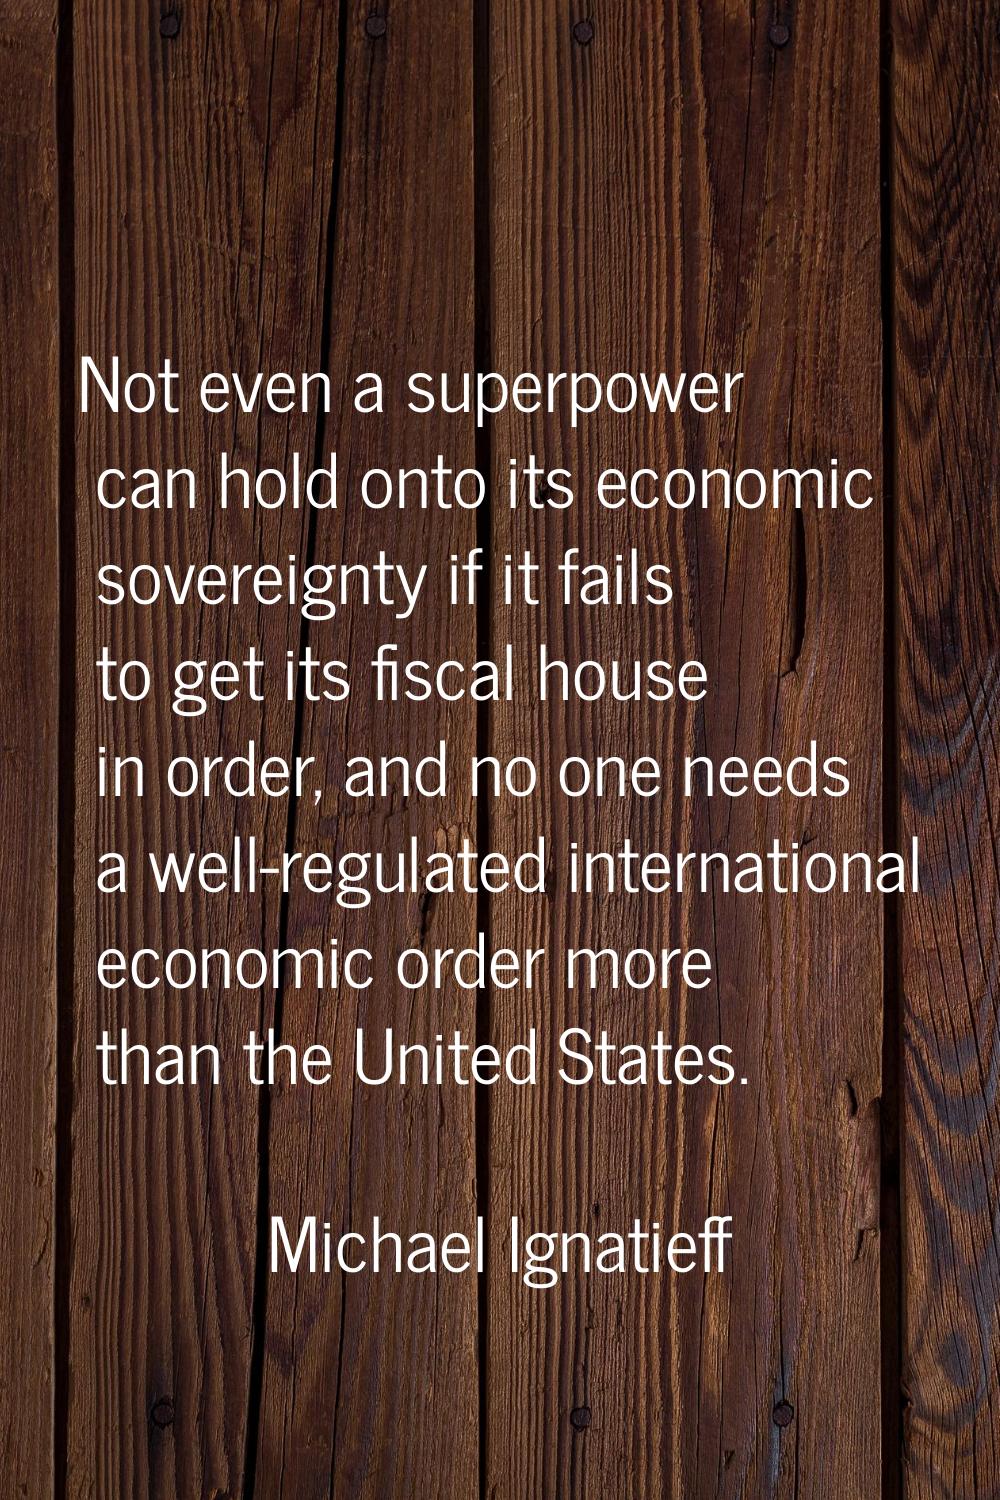 Not even a superpower can hold onto its economic sovereignty if it fails to get its fiscal house in